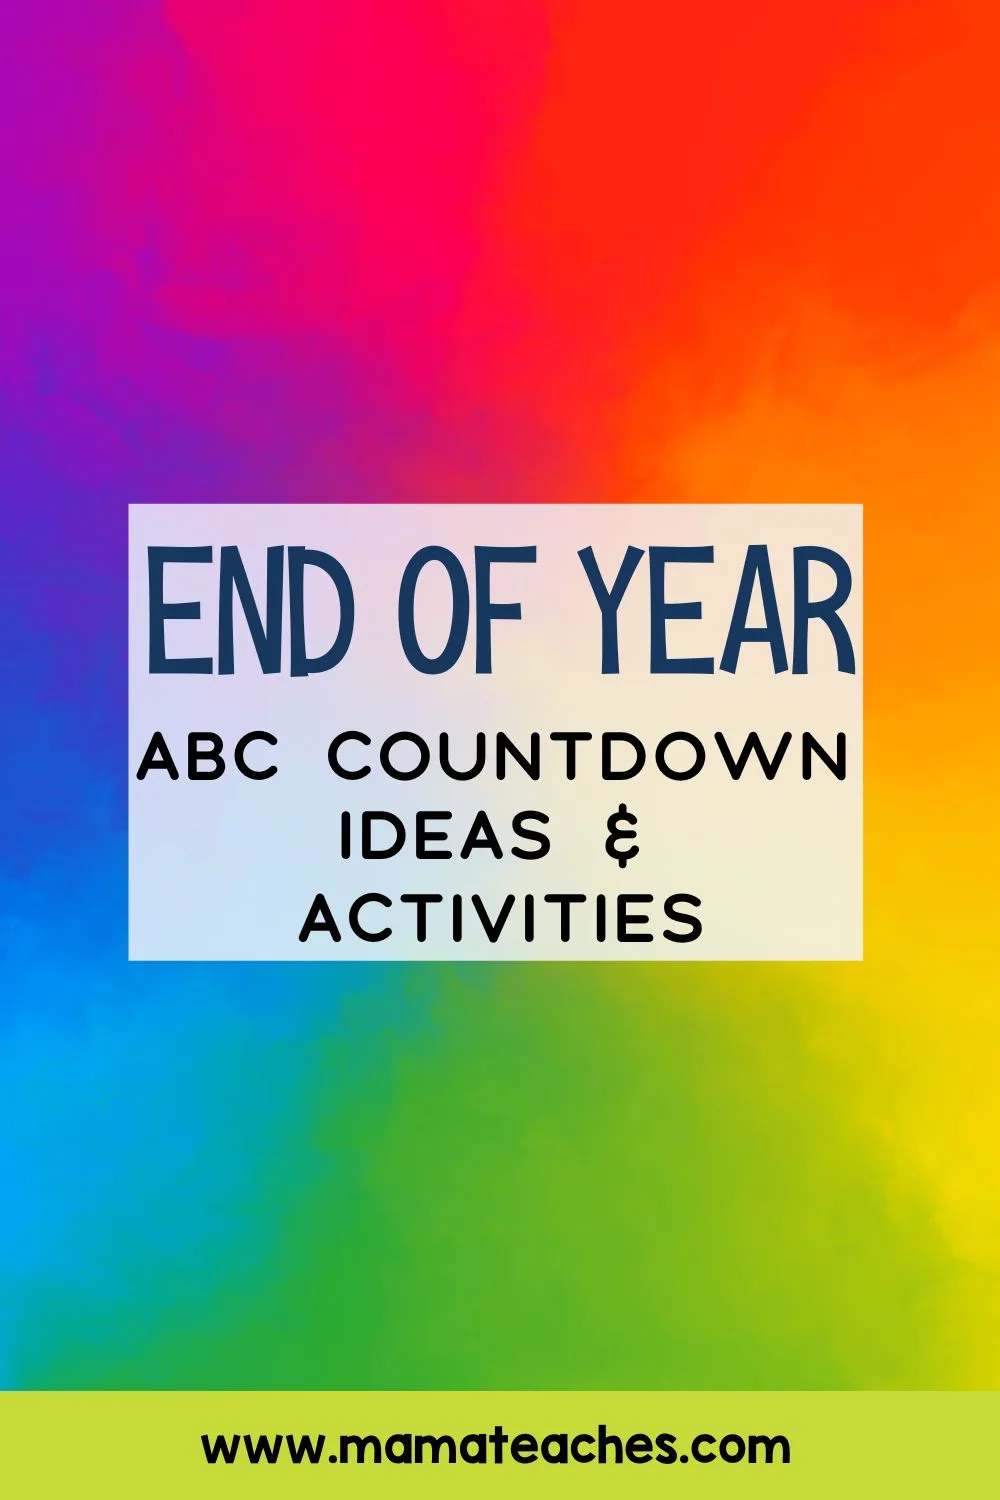 END OF YEAR ABC COUNTDOWN IDEAS